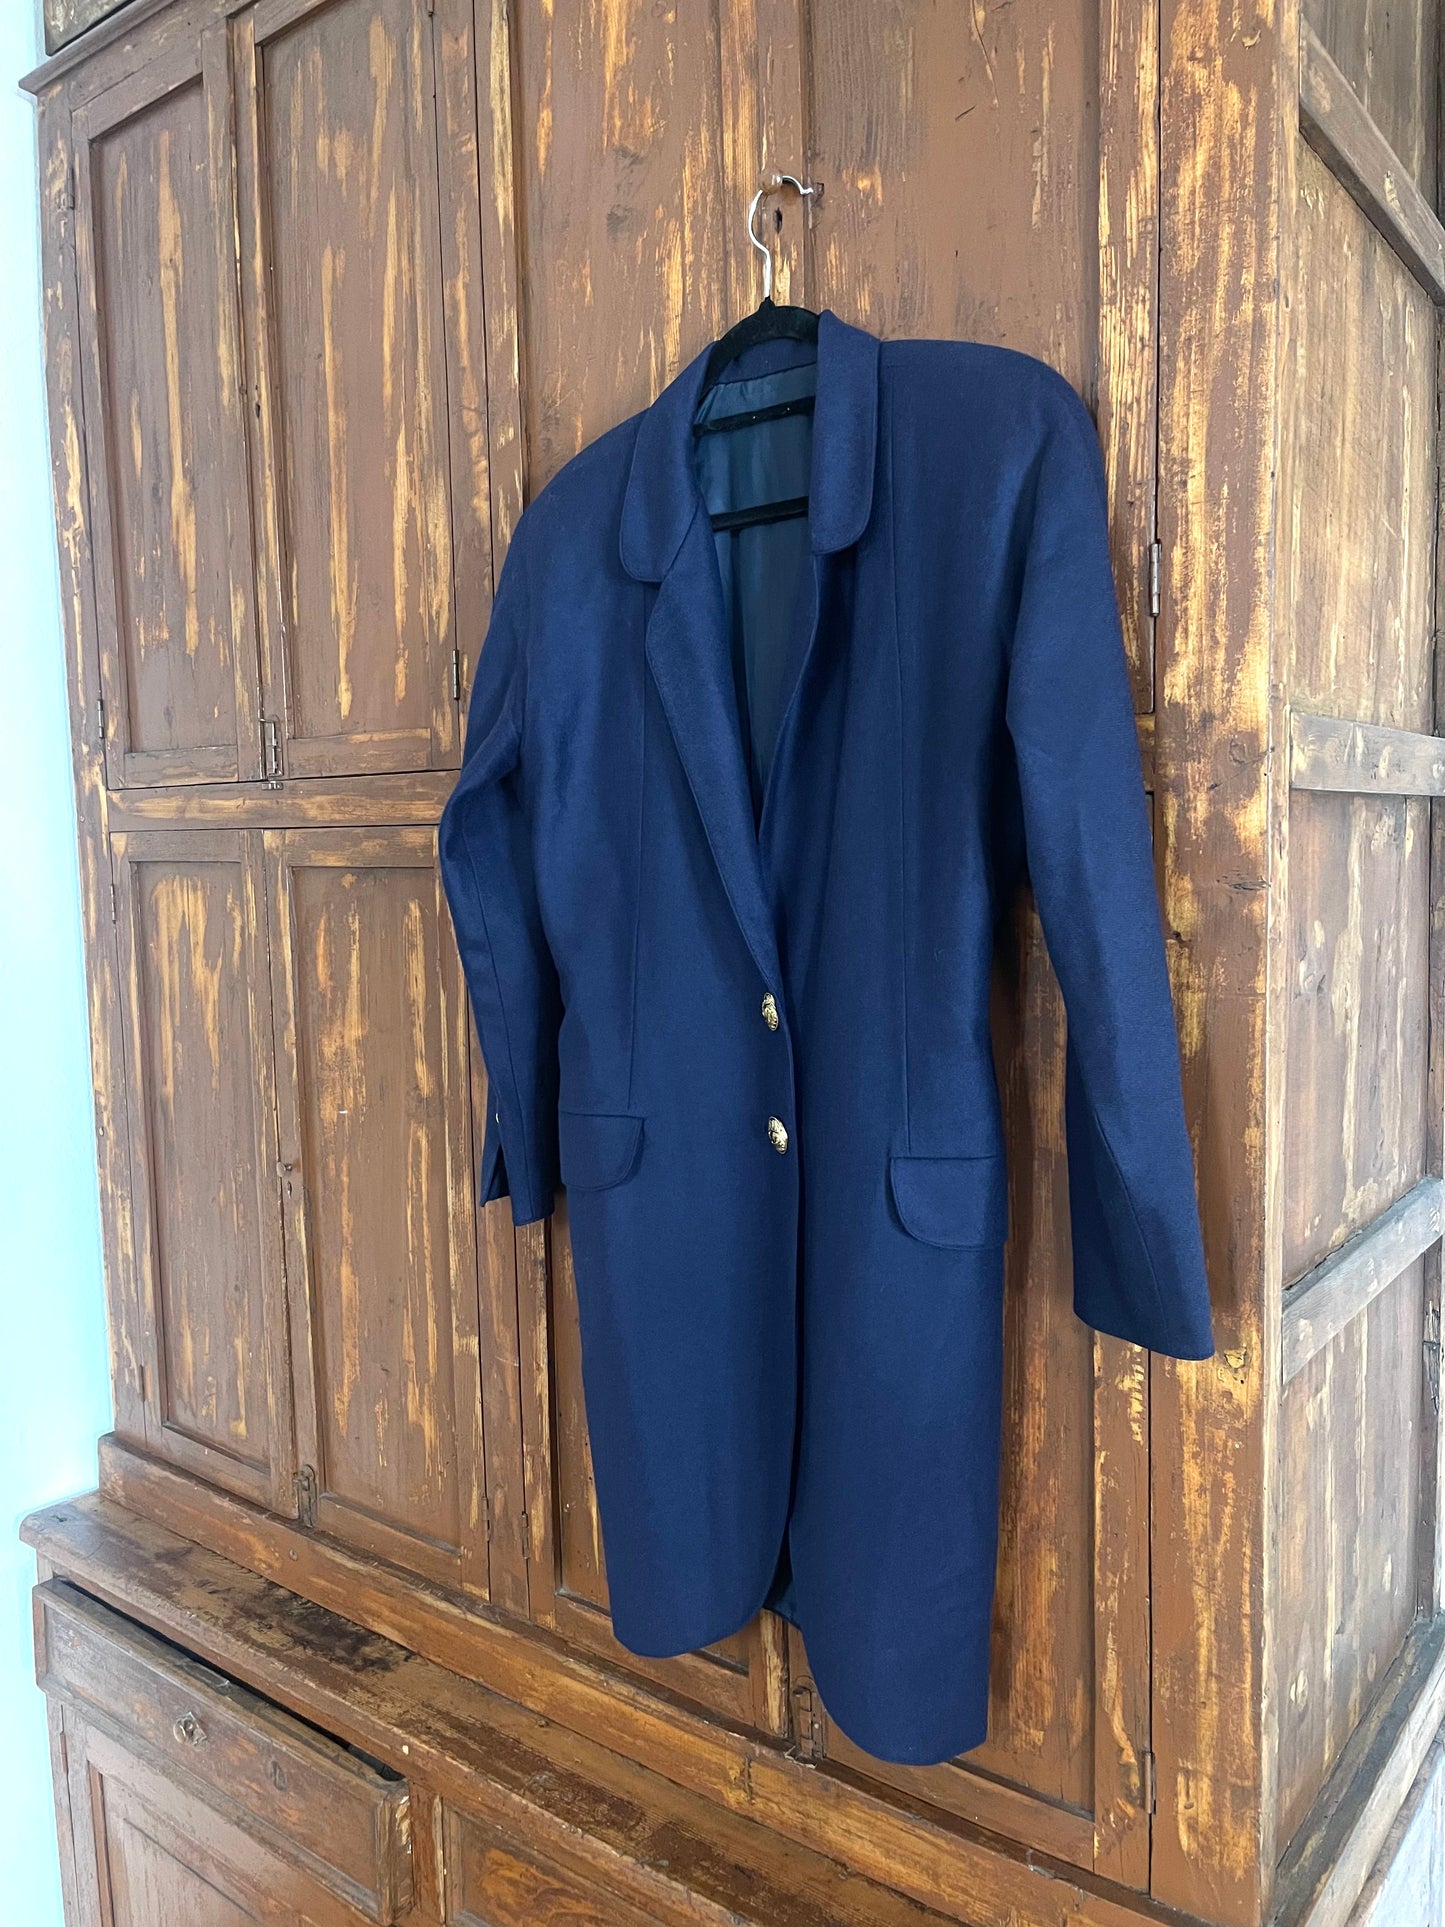 The Blue tailoring suit